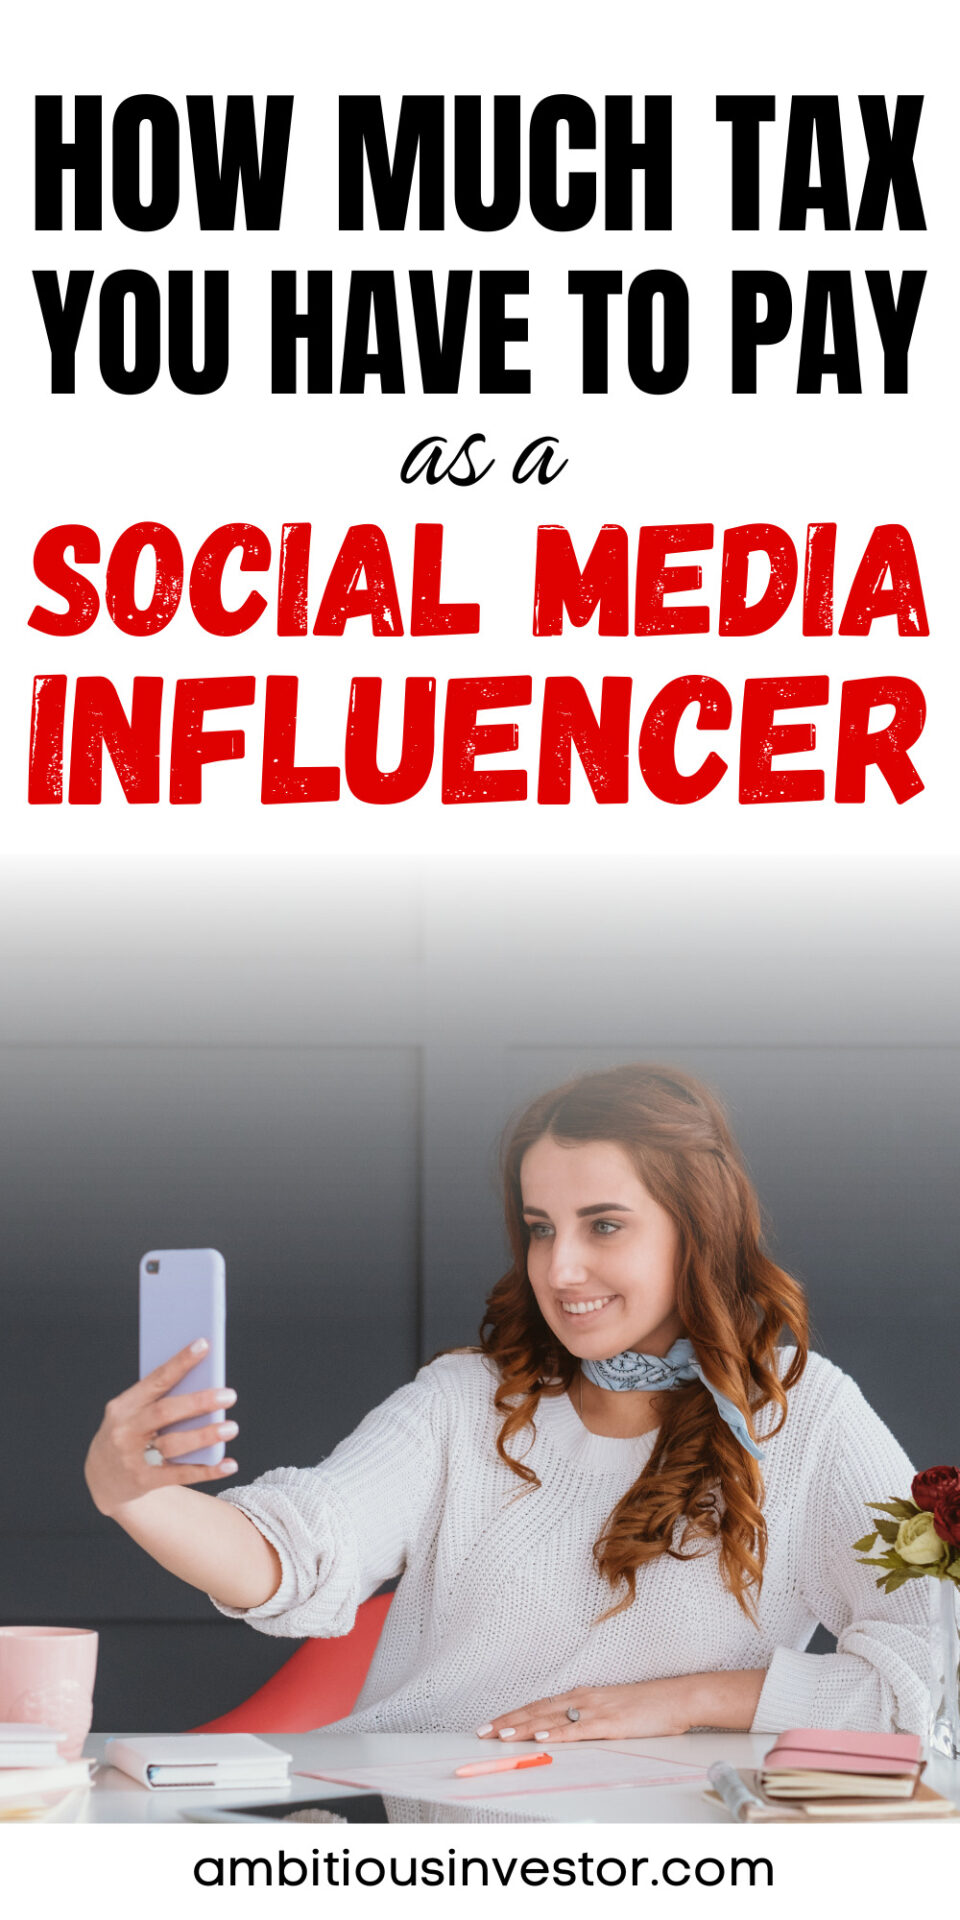 How Much Tax You Have To Pay as a Social Media Influencer